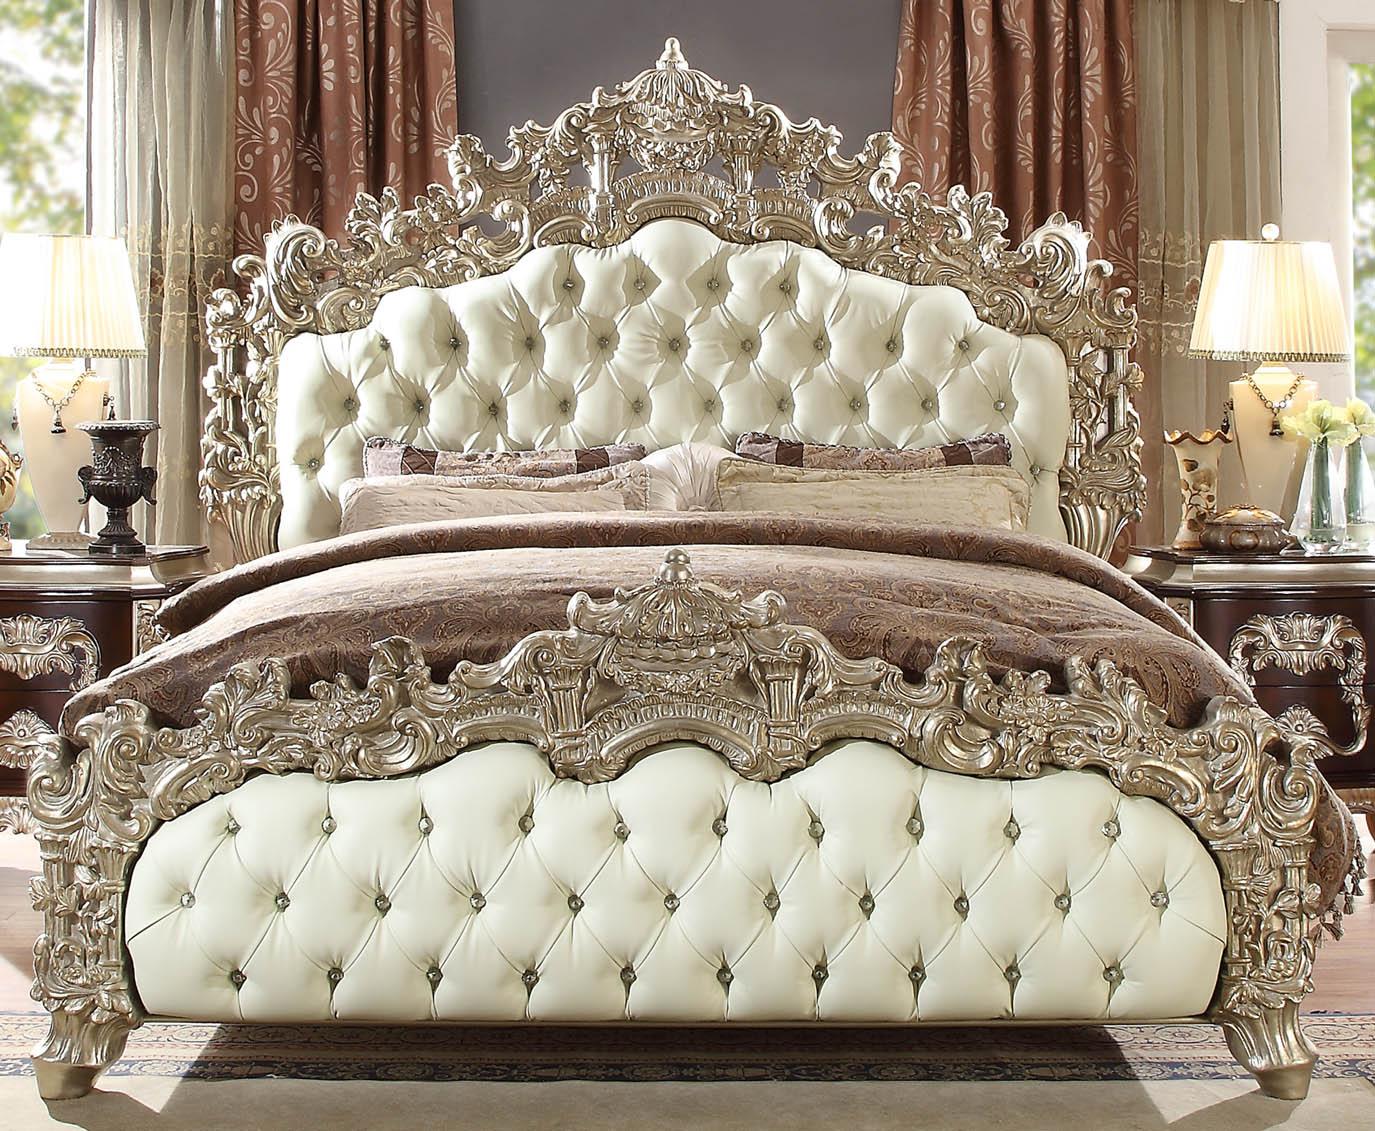 Traditional Panel Bed HD-8017 – CK BED HD-8017 – CK BED in Antique Silver, Antique White Leather